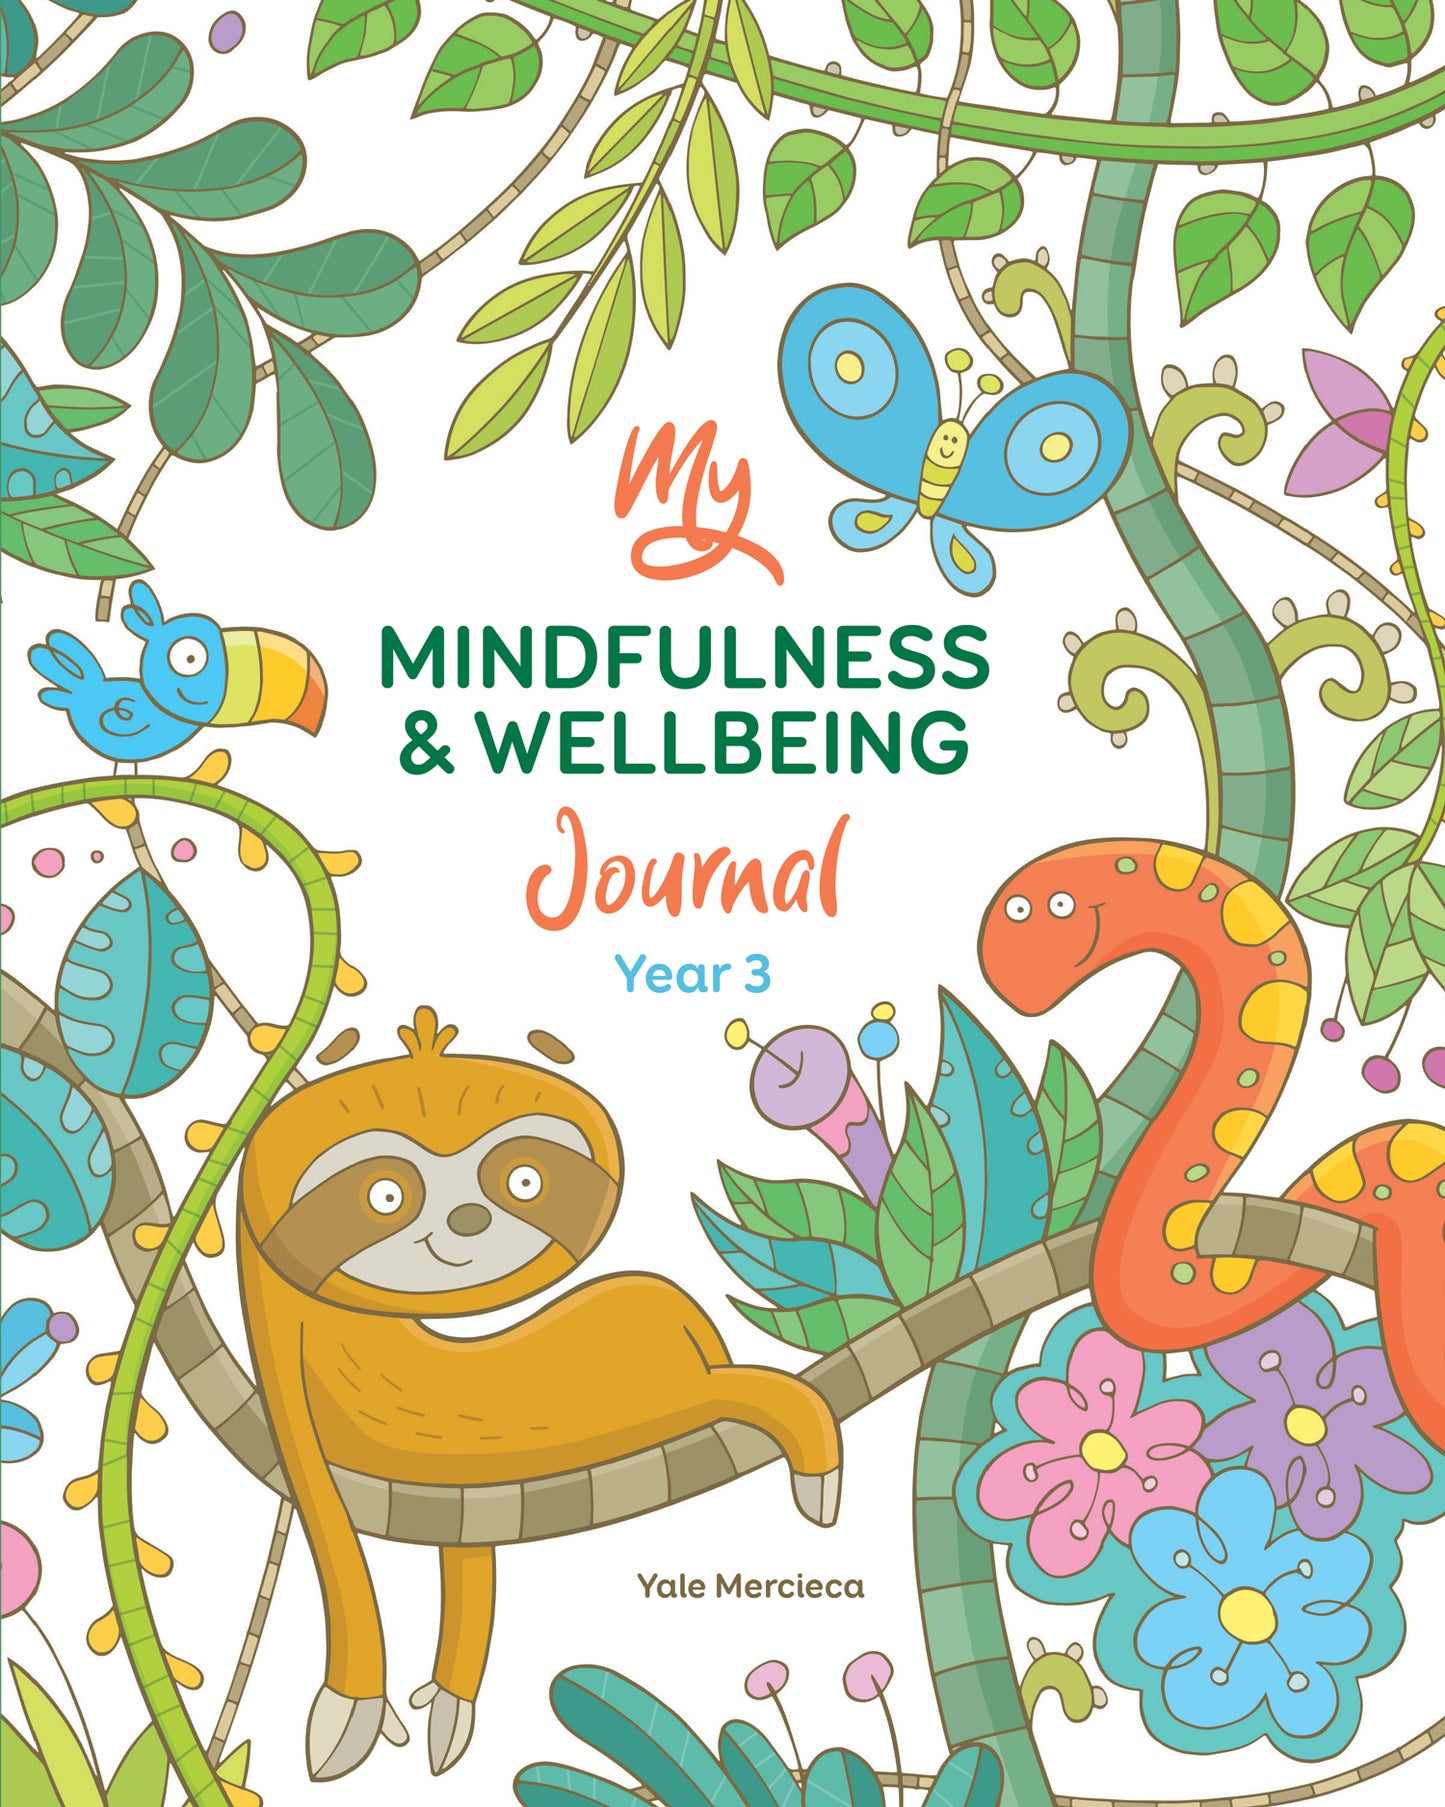 The cover of the book ‘My Mindfulness & Wellbeing Journal Year 3'